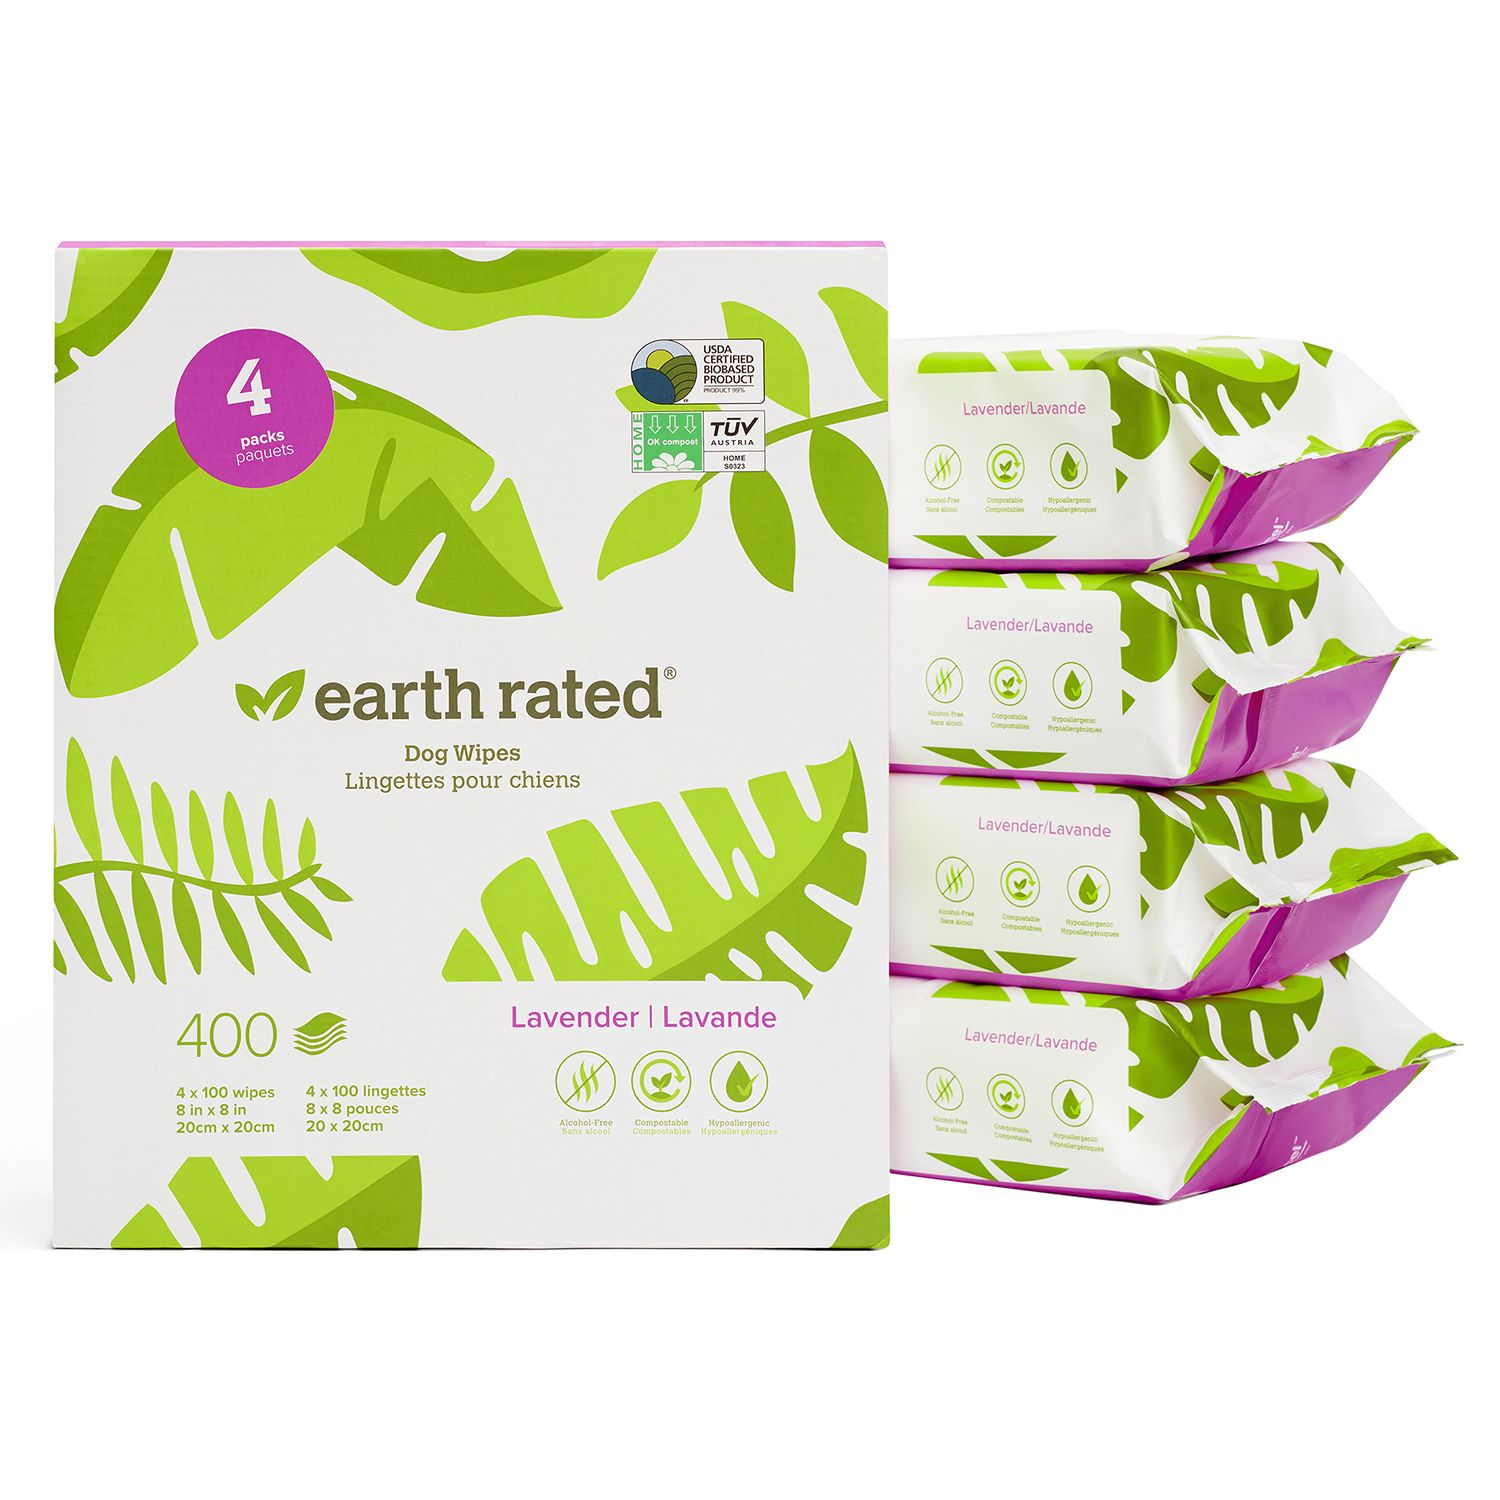 Image for Earth Rated 400 USDA Certified Biobased Wipes - Lavender at Kohl's.